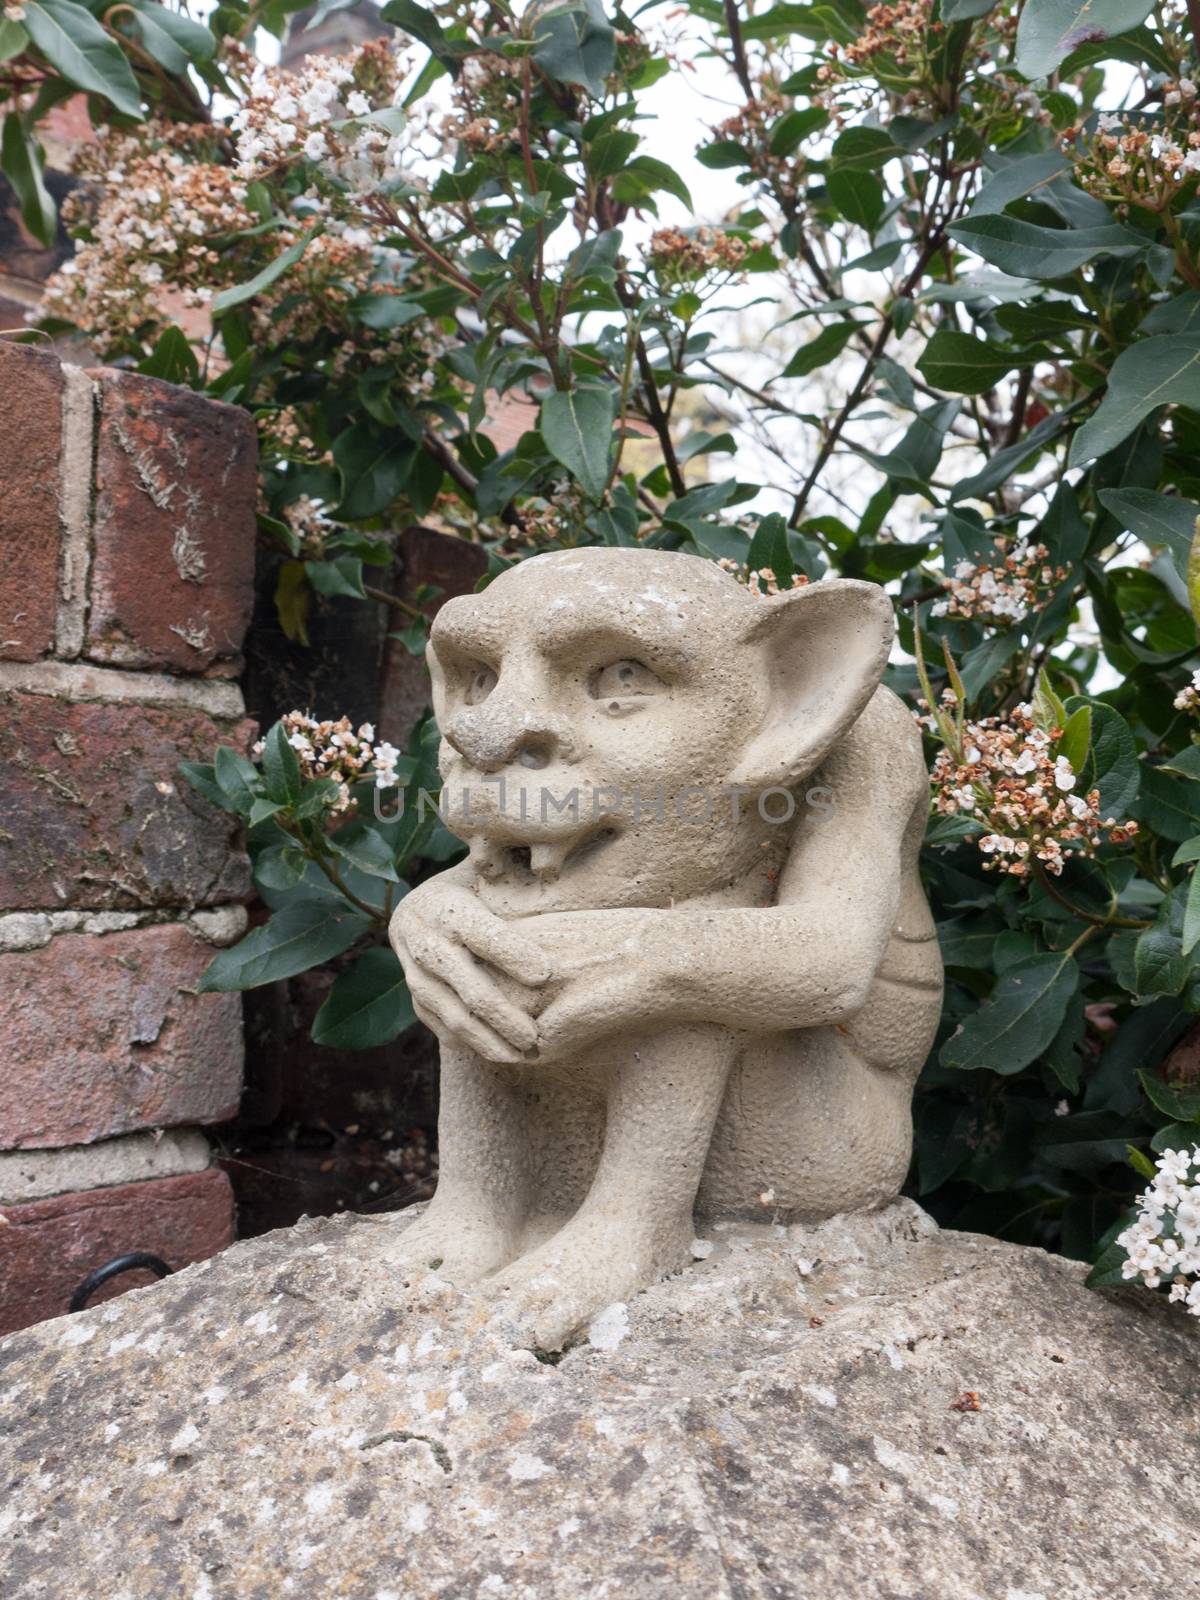 a strange goblin gremlin concrete statue on a pillar outside with fangs and big ears creepy scary odd